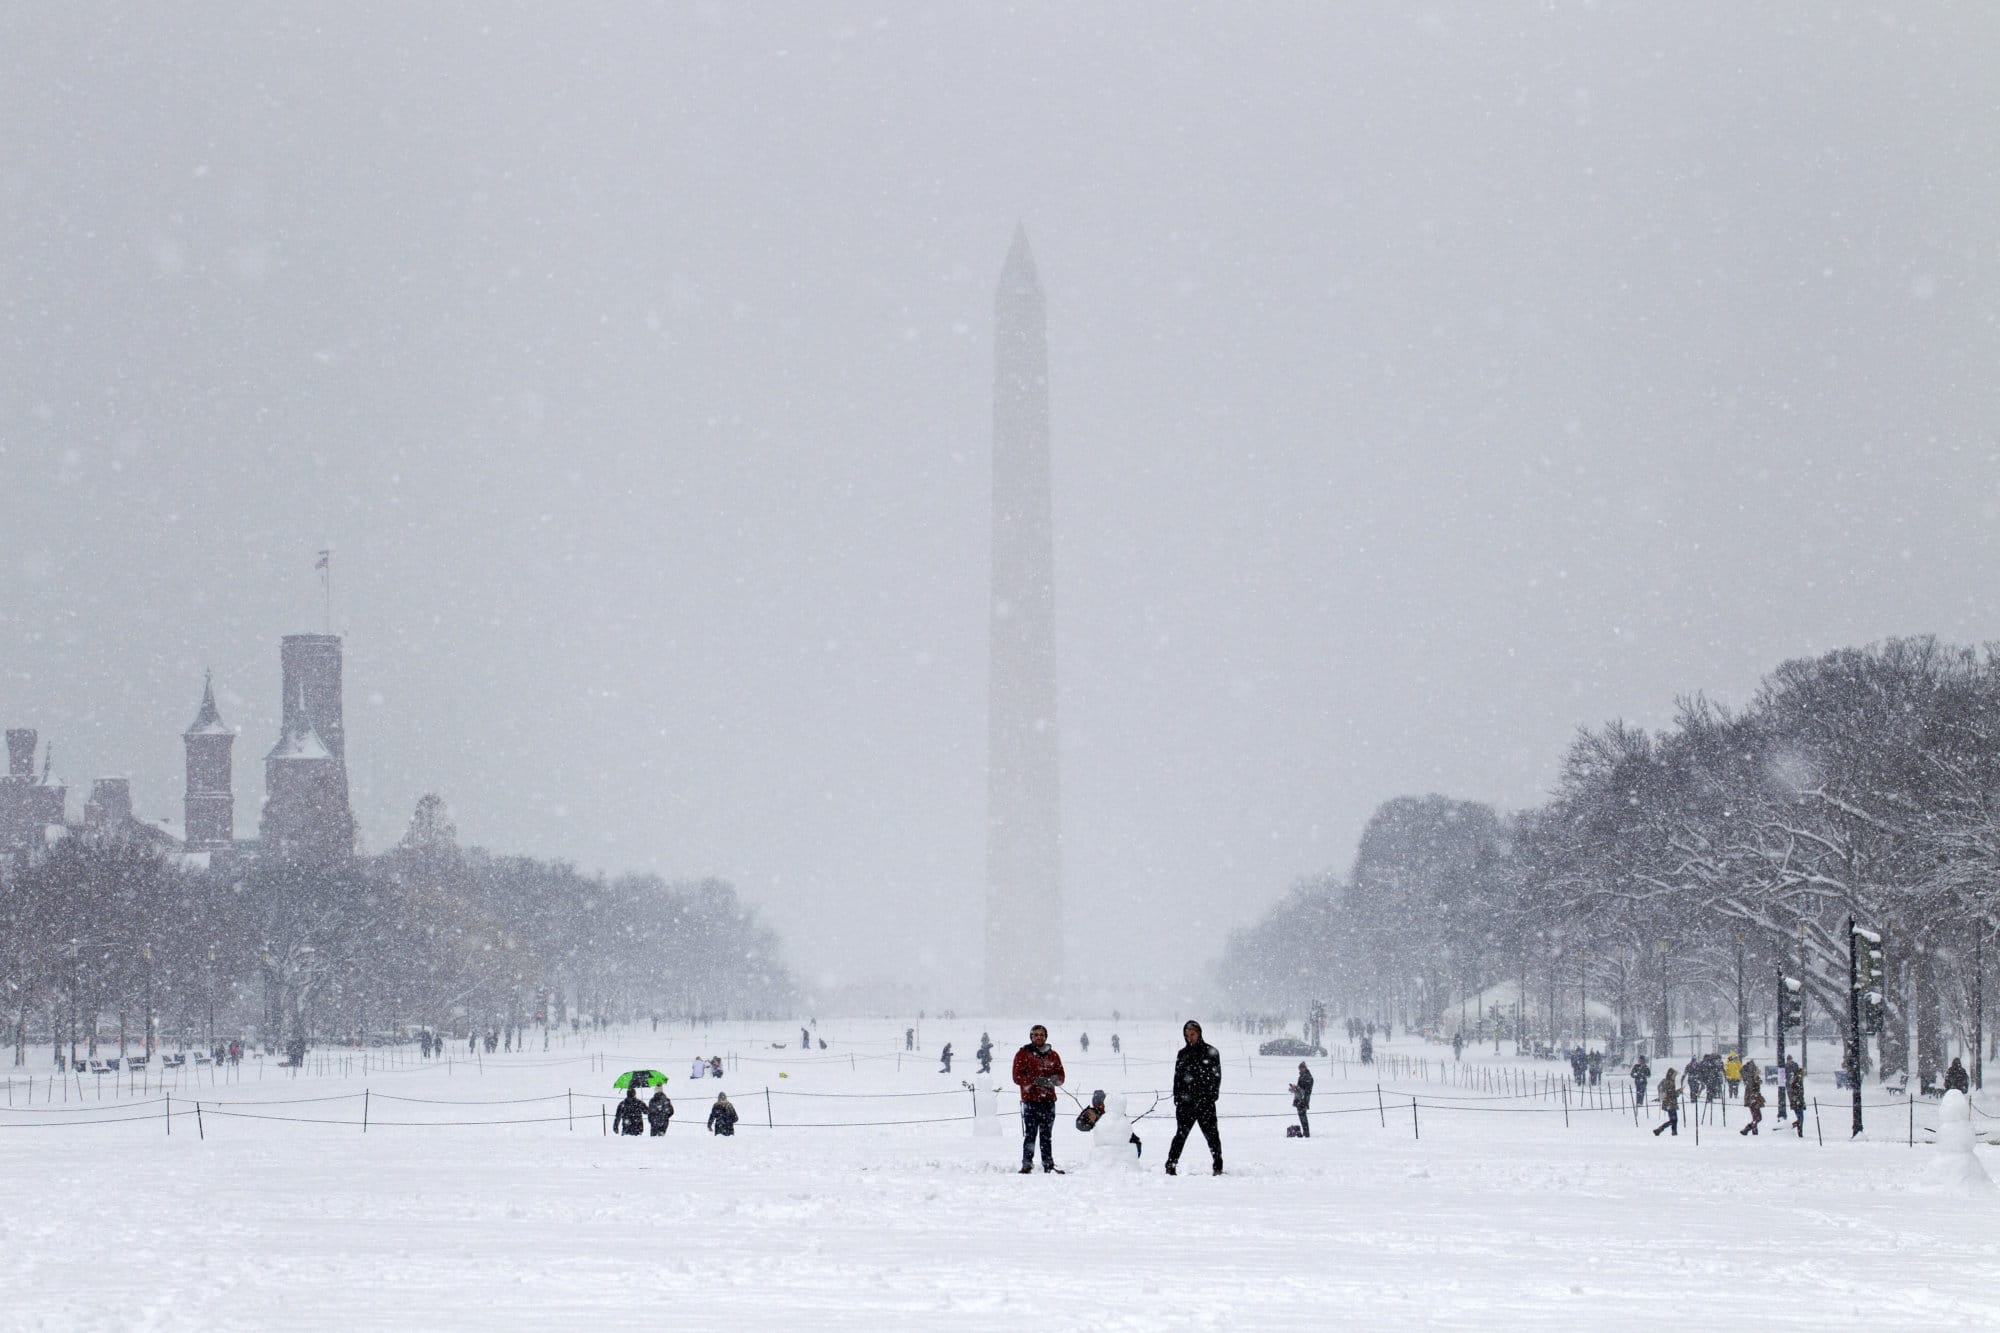 More snow, rain to hit DC area this weekend; winter advisory, warning